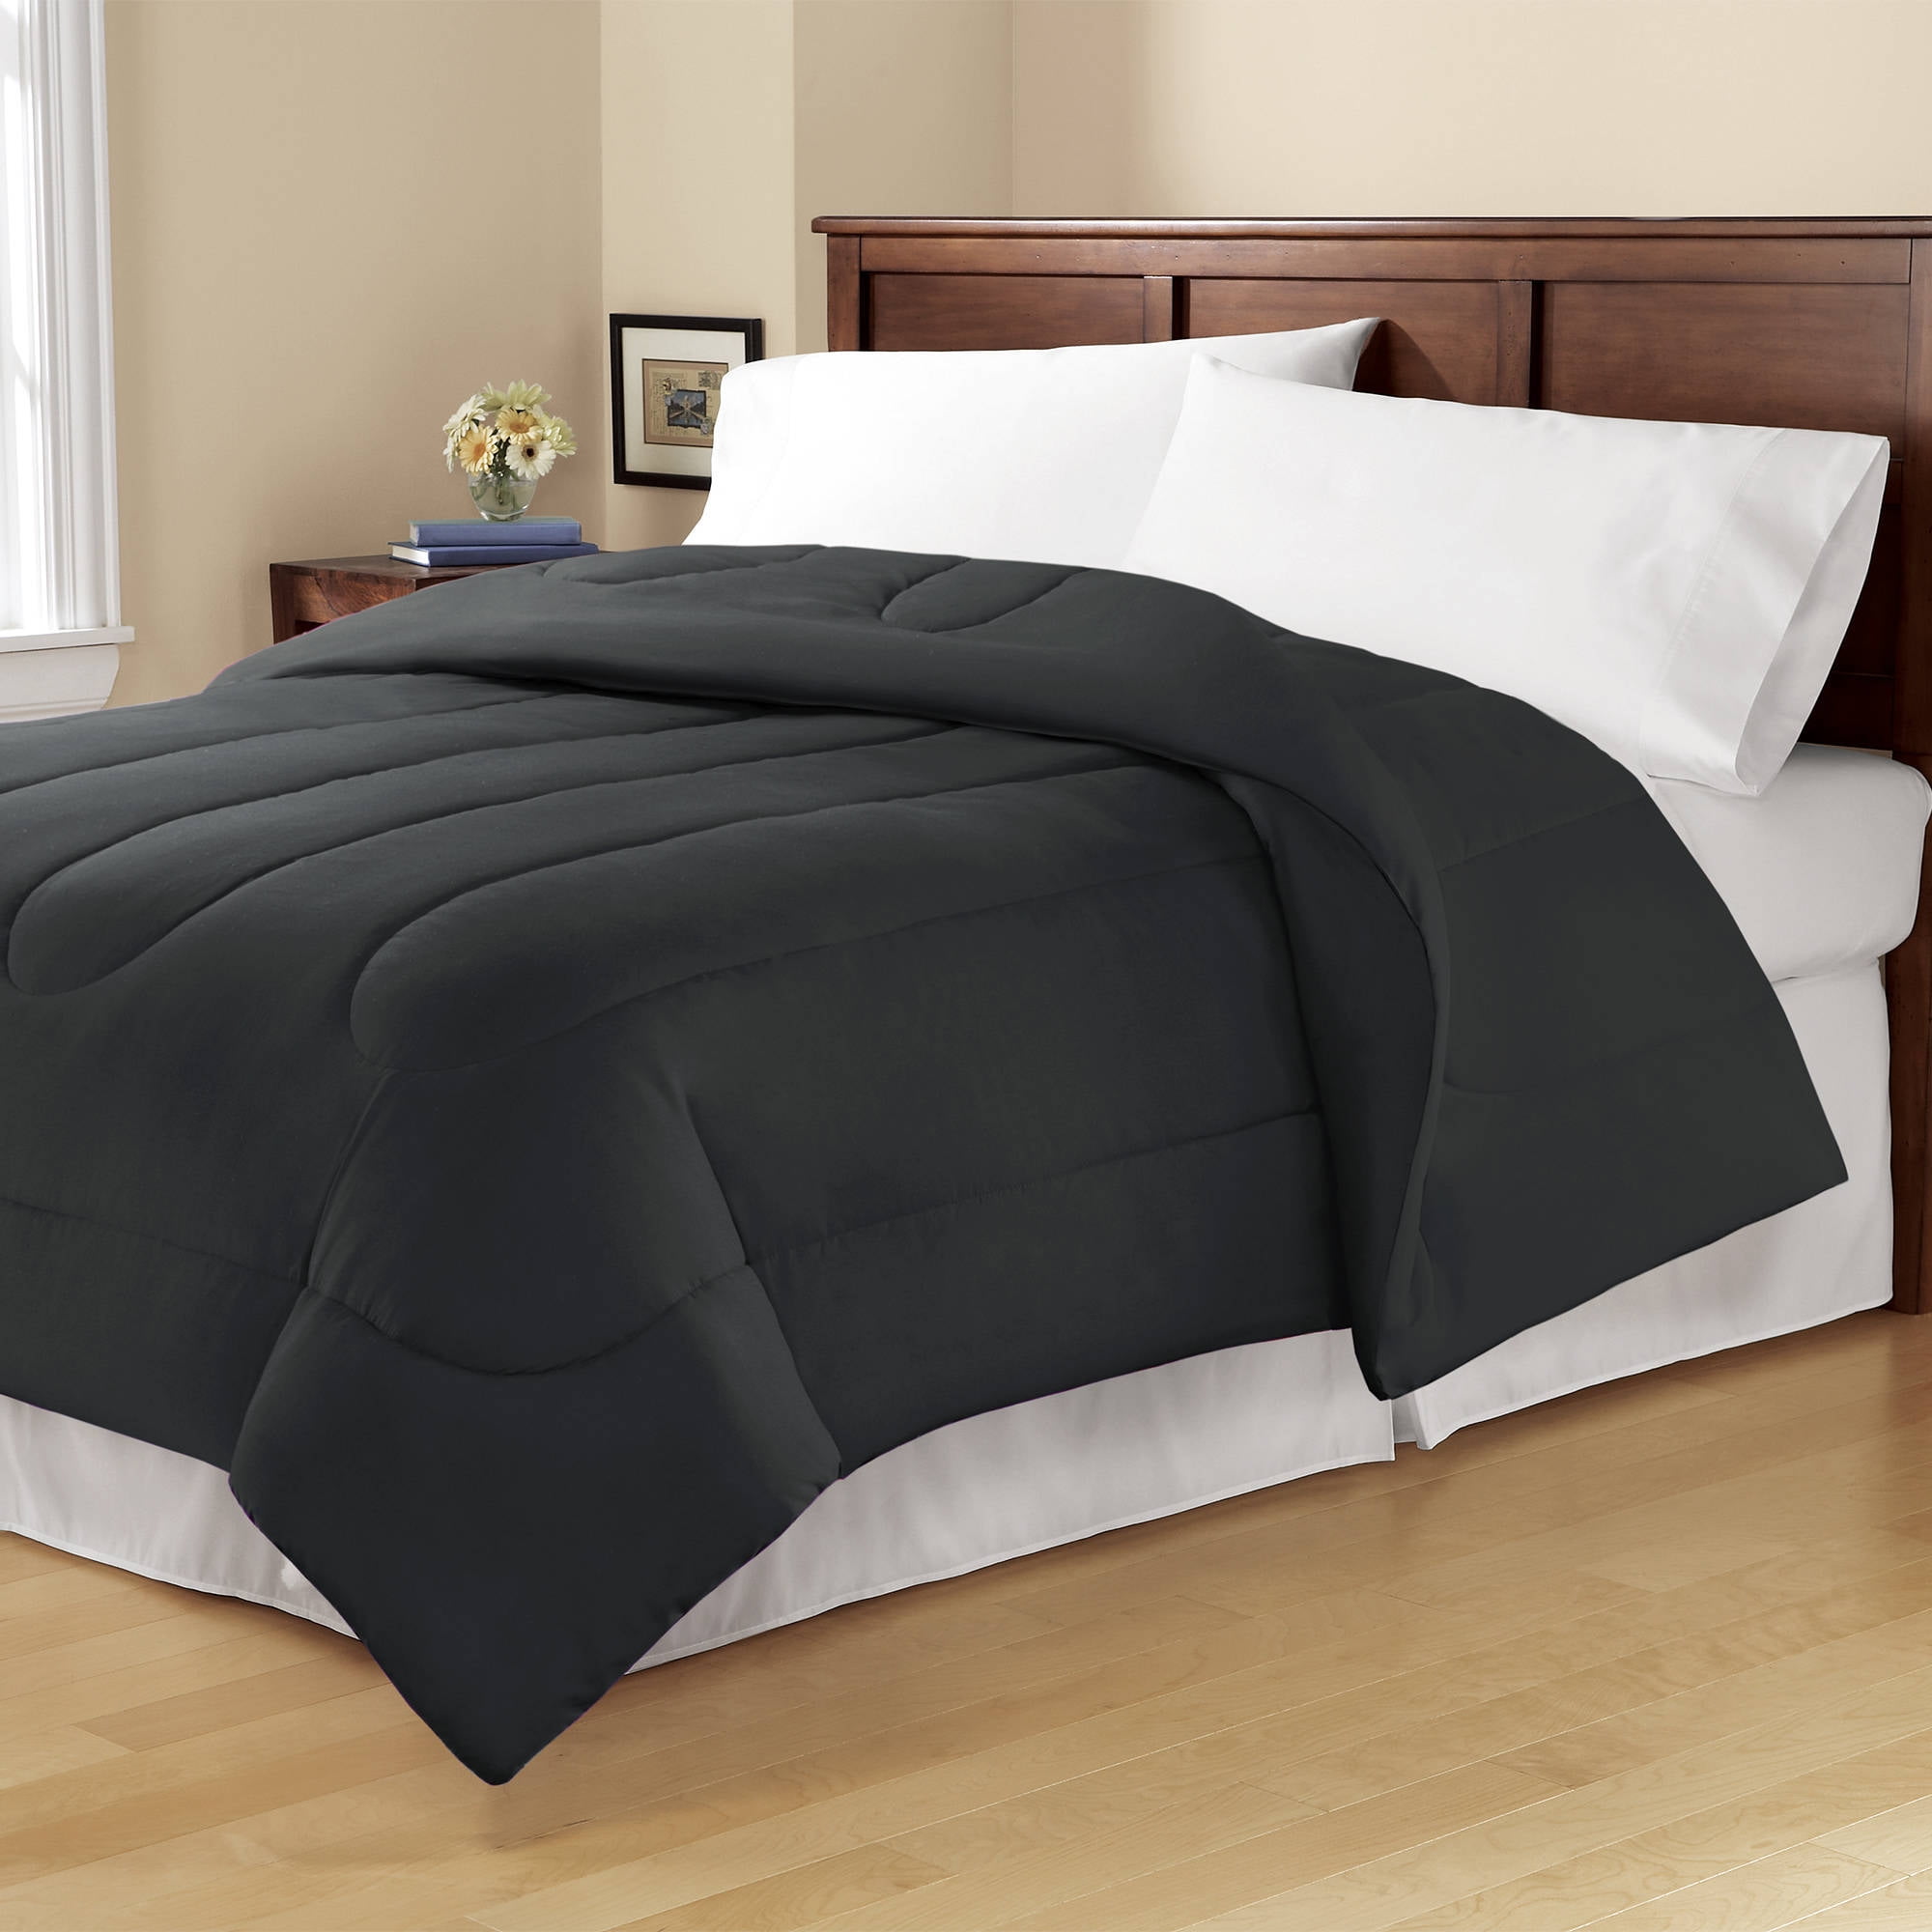 Mainstays Full Or Queen Solid Reversible Comforter 1 Each